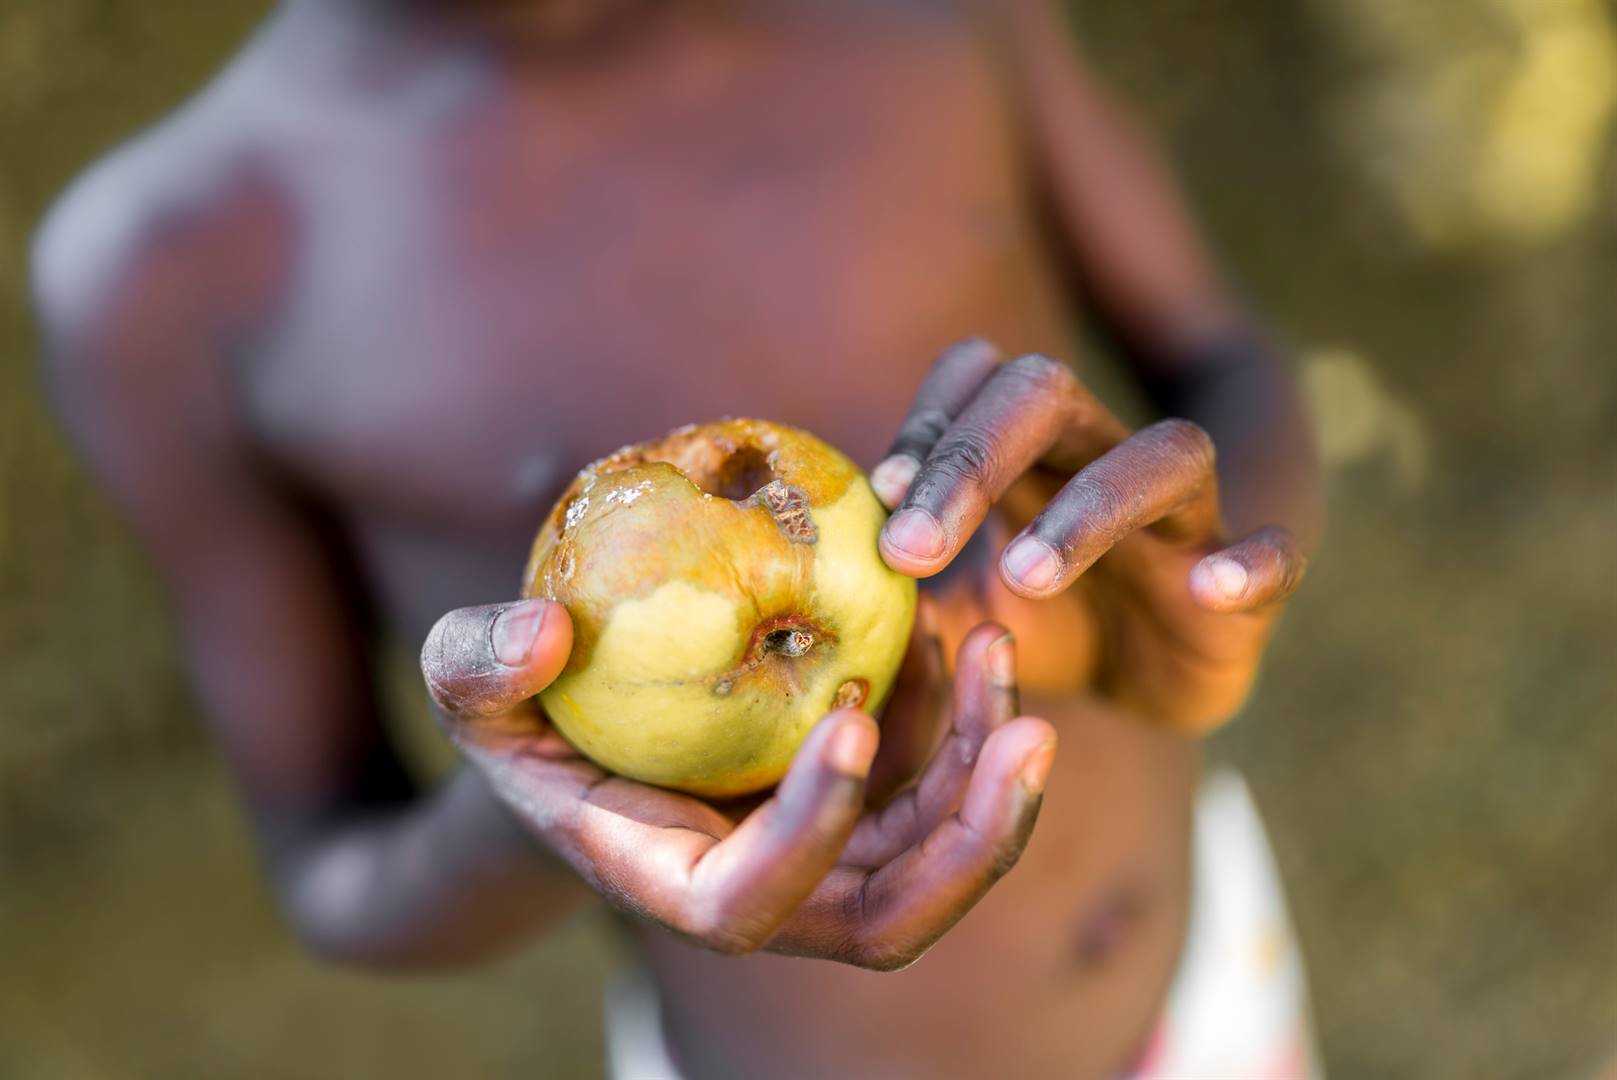 danger! Disruption to supply as well as accelerating inflation have raised the alarm on deepening food insecurity in sub-Saharan Africa. Photo: istock